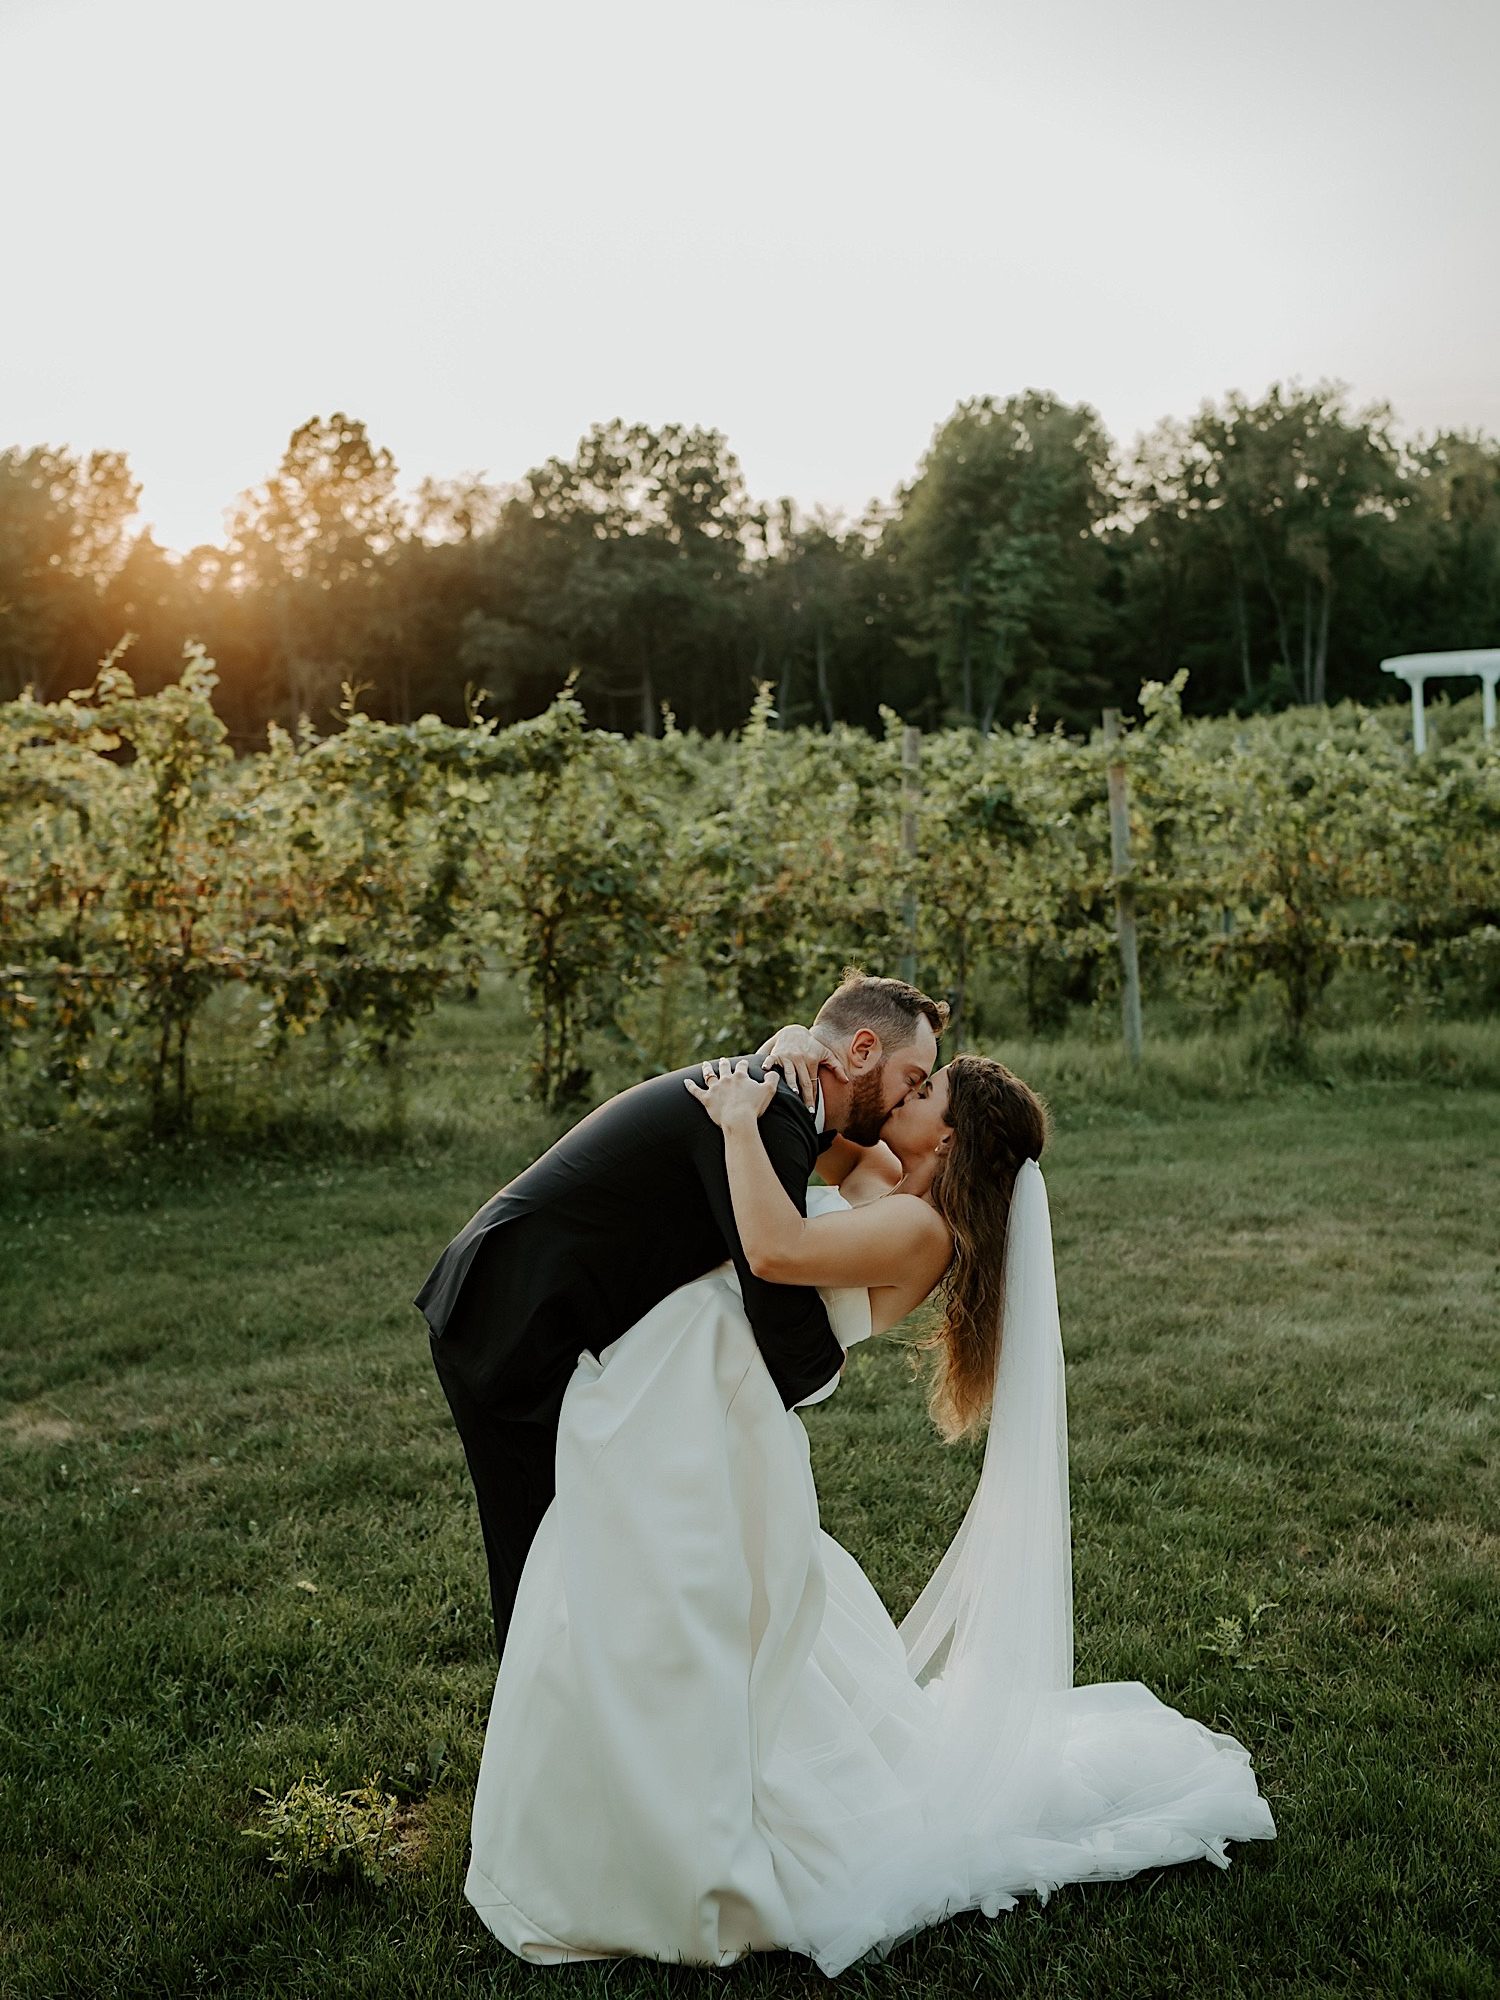 Bride and groom kiss in front of a vineyard and the sunset before their wedding reception